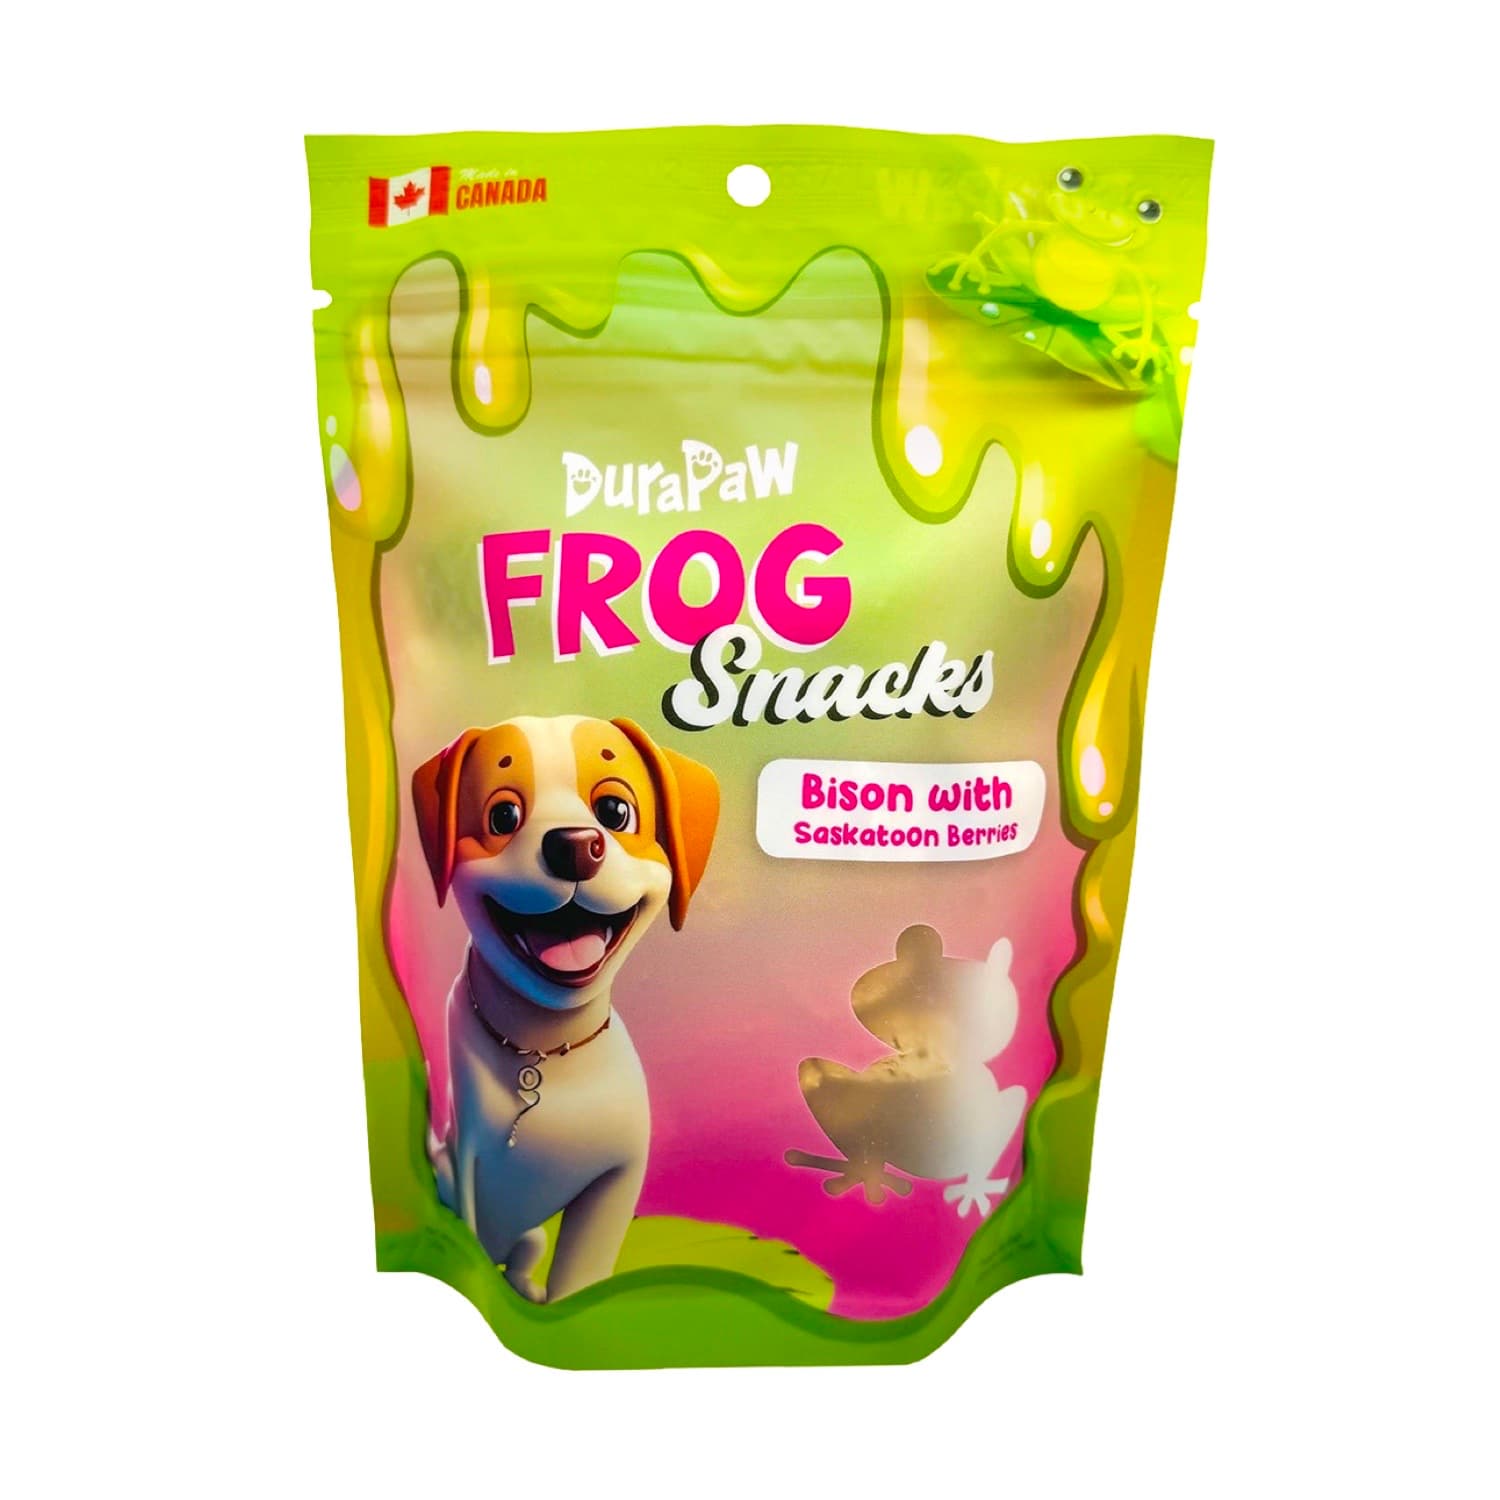 DuraPaw Canadian Dog Treats Frog Snacks Bison with Berries